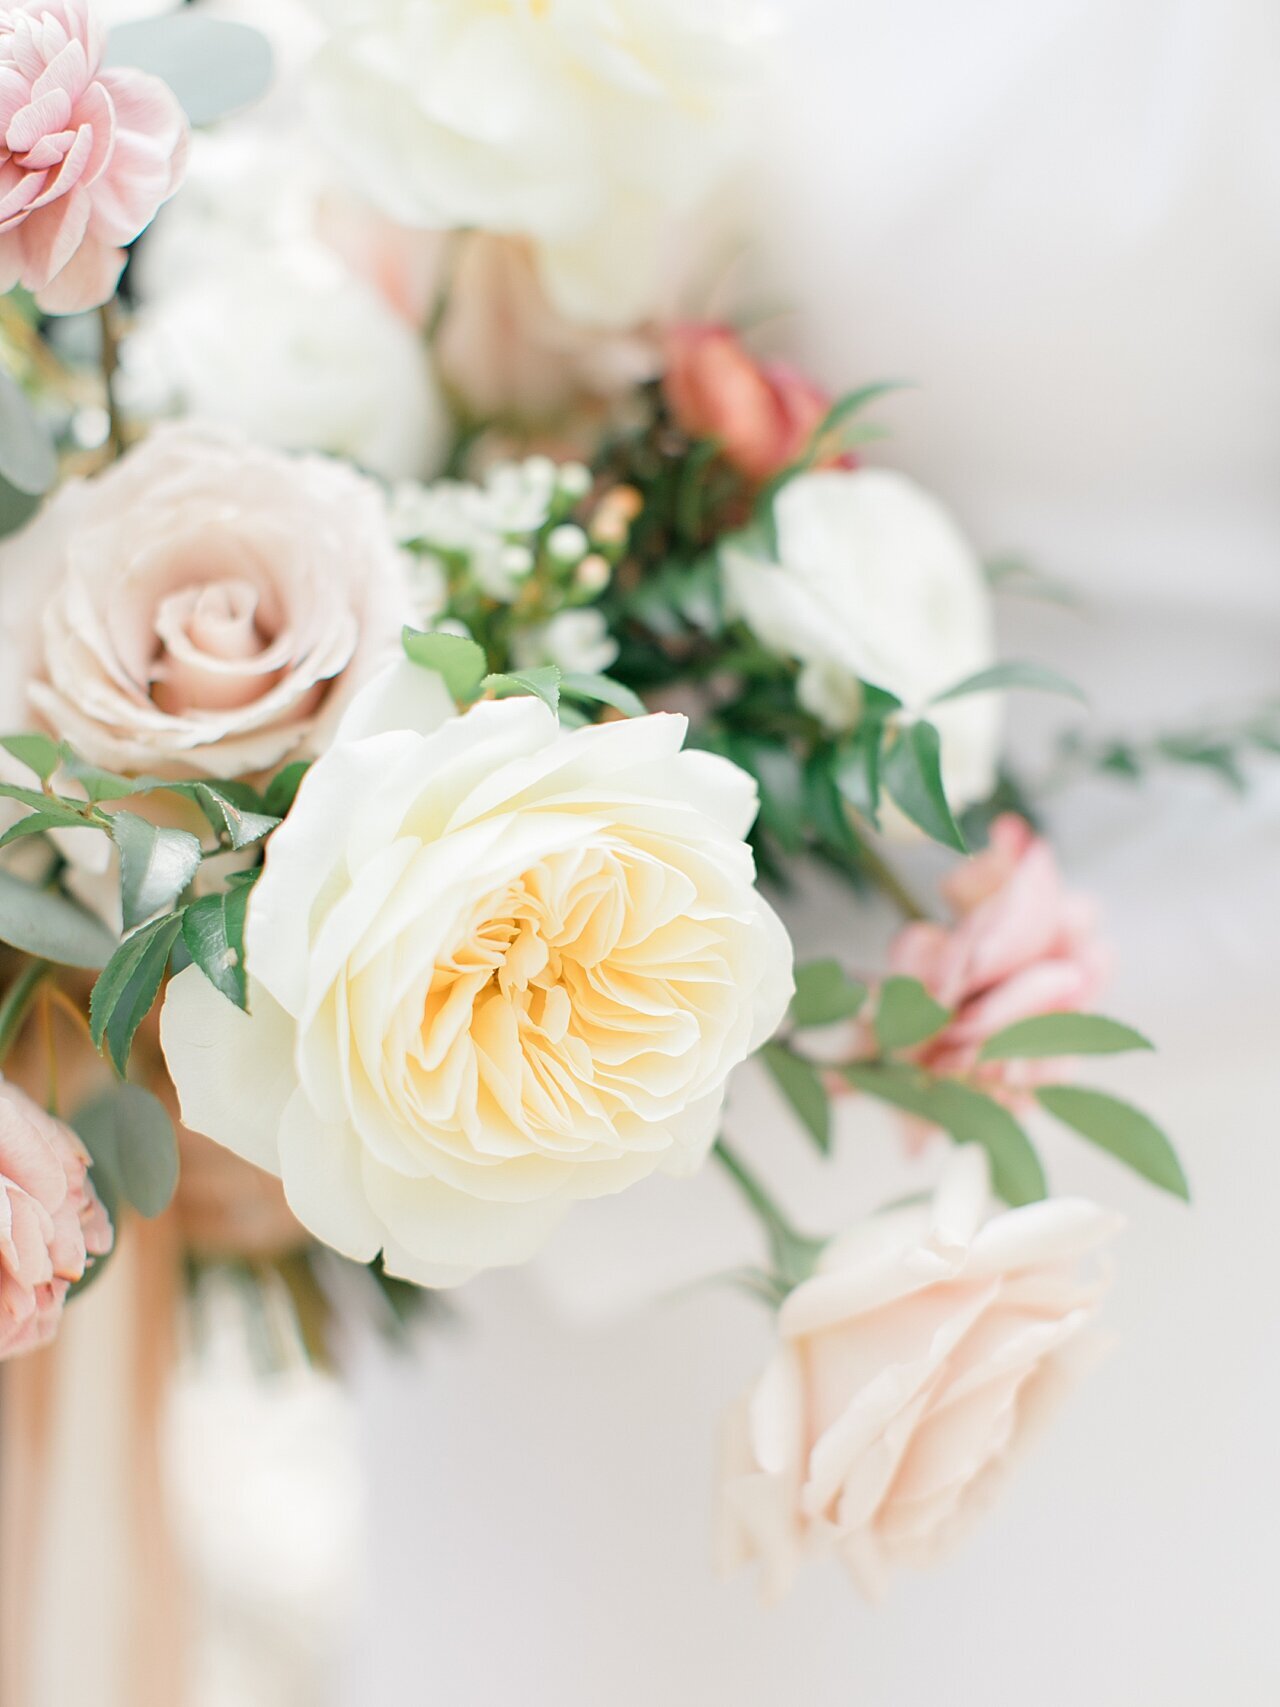 Emerald grace floral design wedding with Lauren Westra photography almond orchard bride and groom soft blush color palette central california weddings_2497